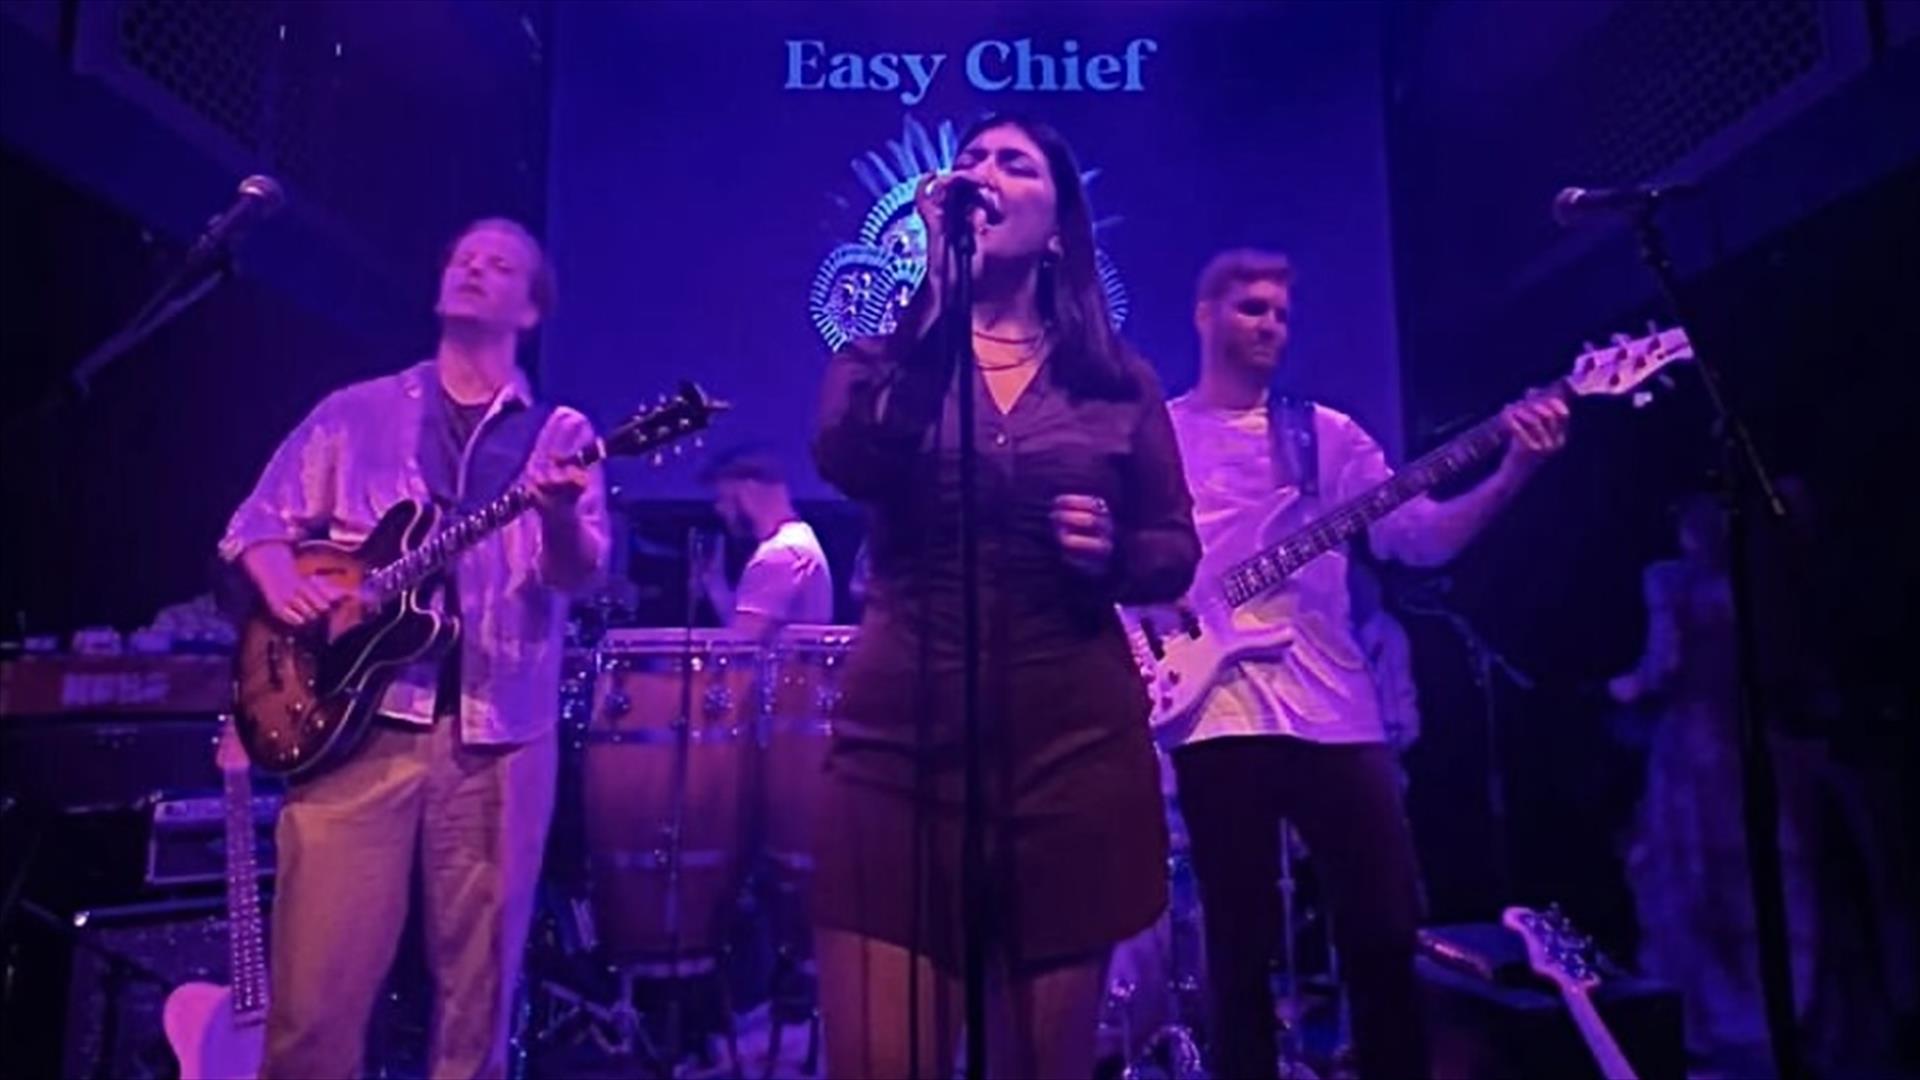 Easy Chief Band